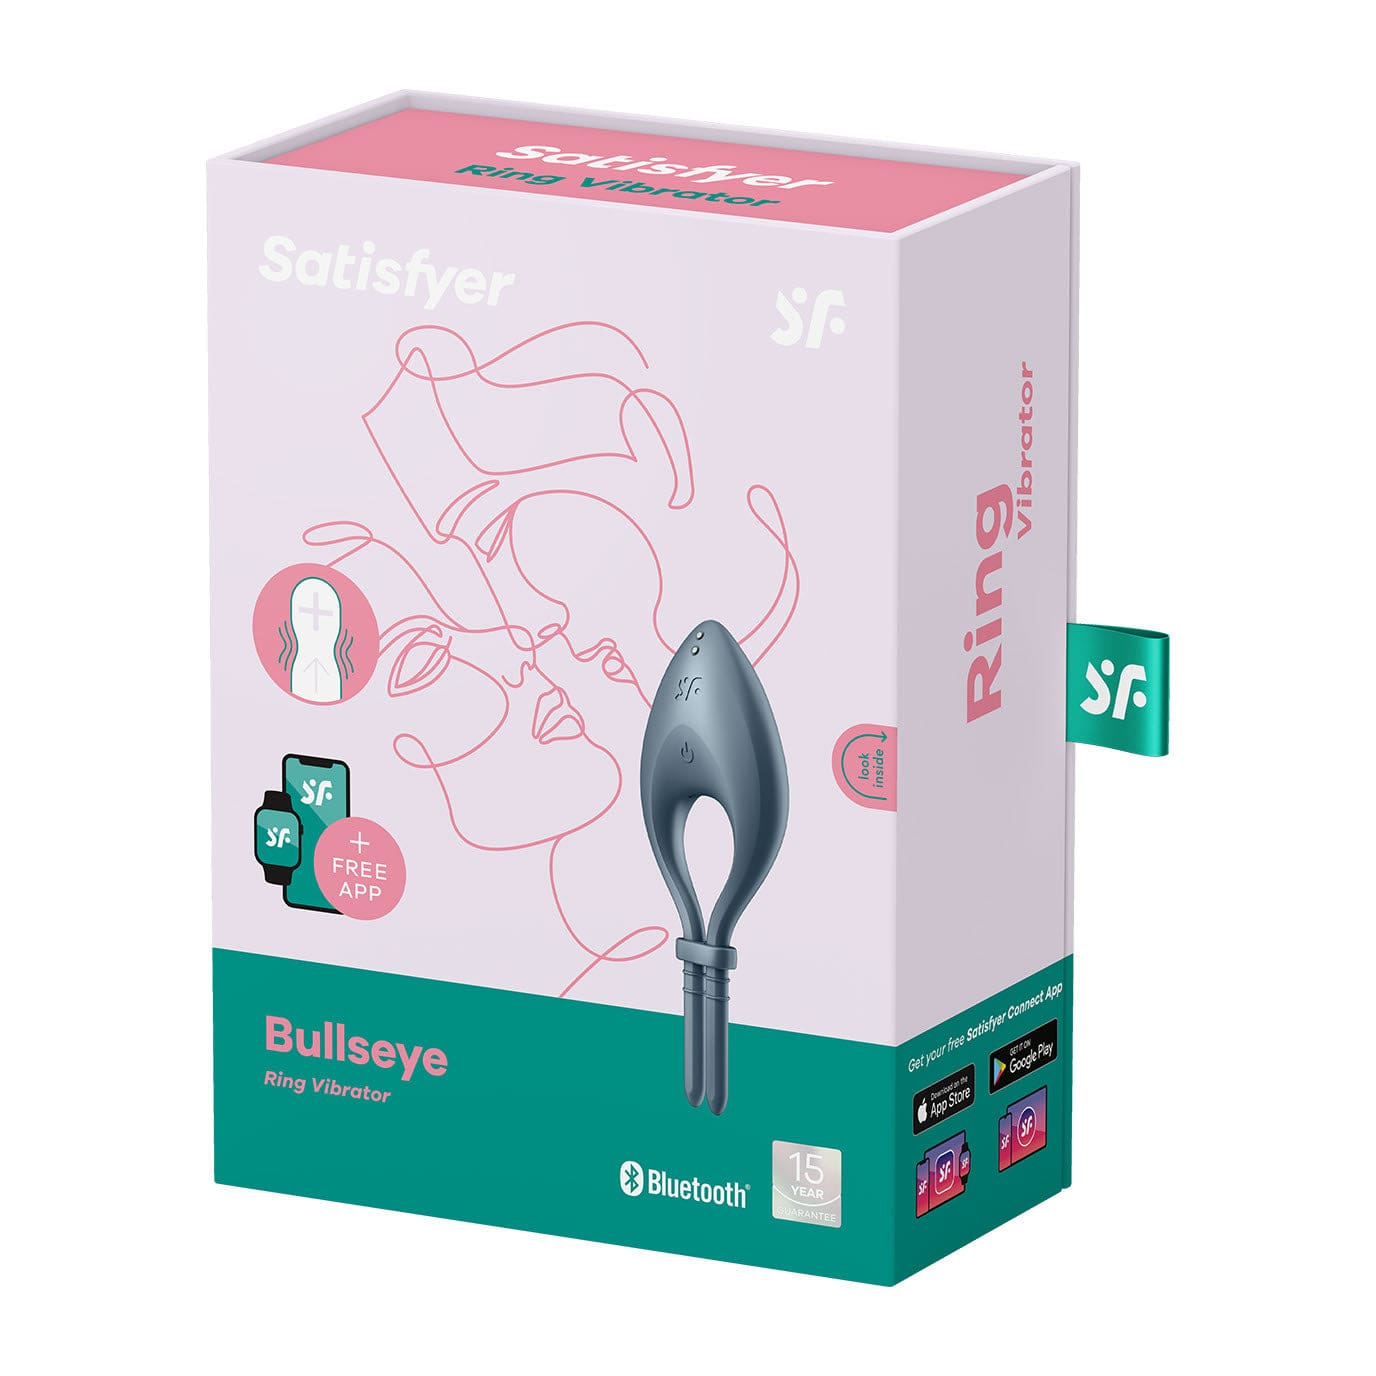 Satisfyer - Bulls Eye App-Controlled Adjustable Vibrating Cock Ring (Grey) -  Silicone Cock Ring (Vibration) Rechargeable  Durio.sg